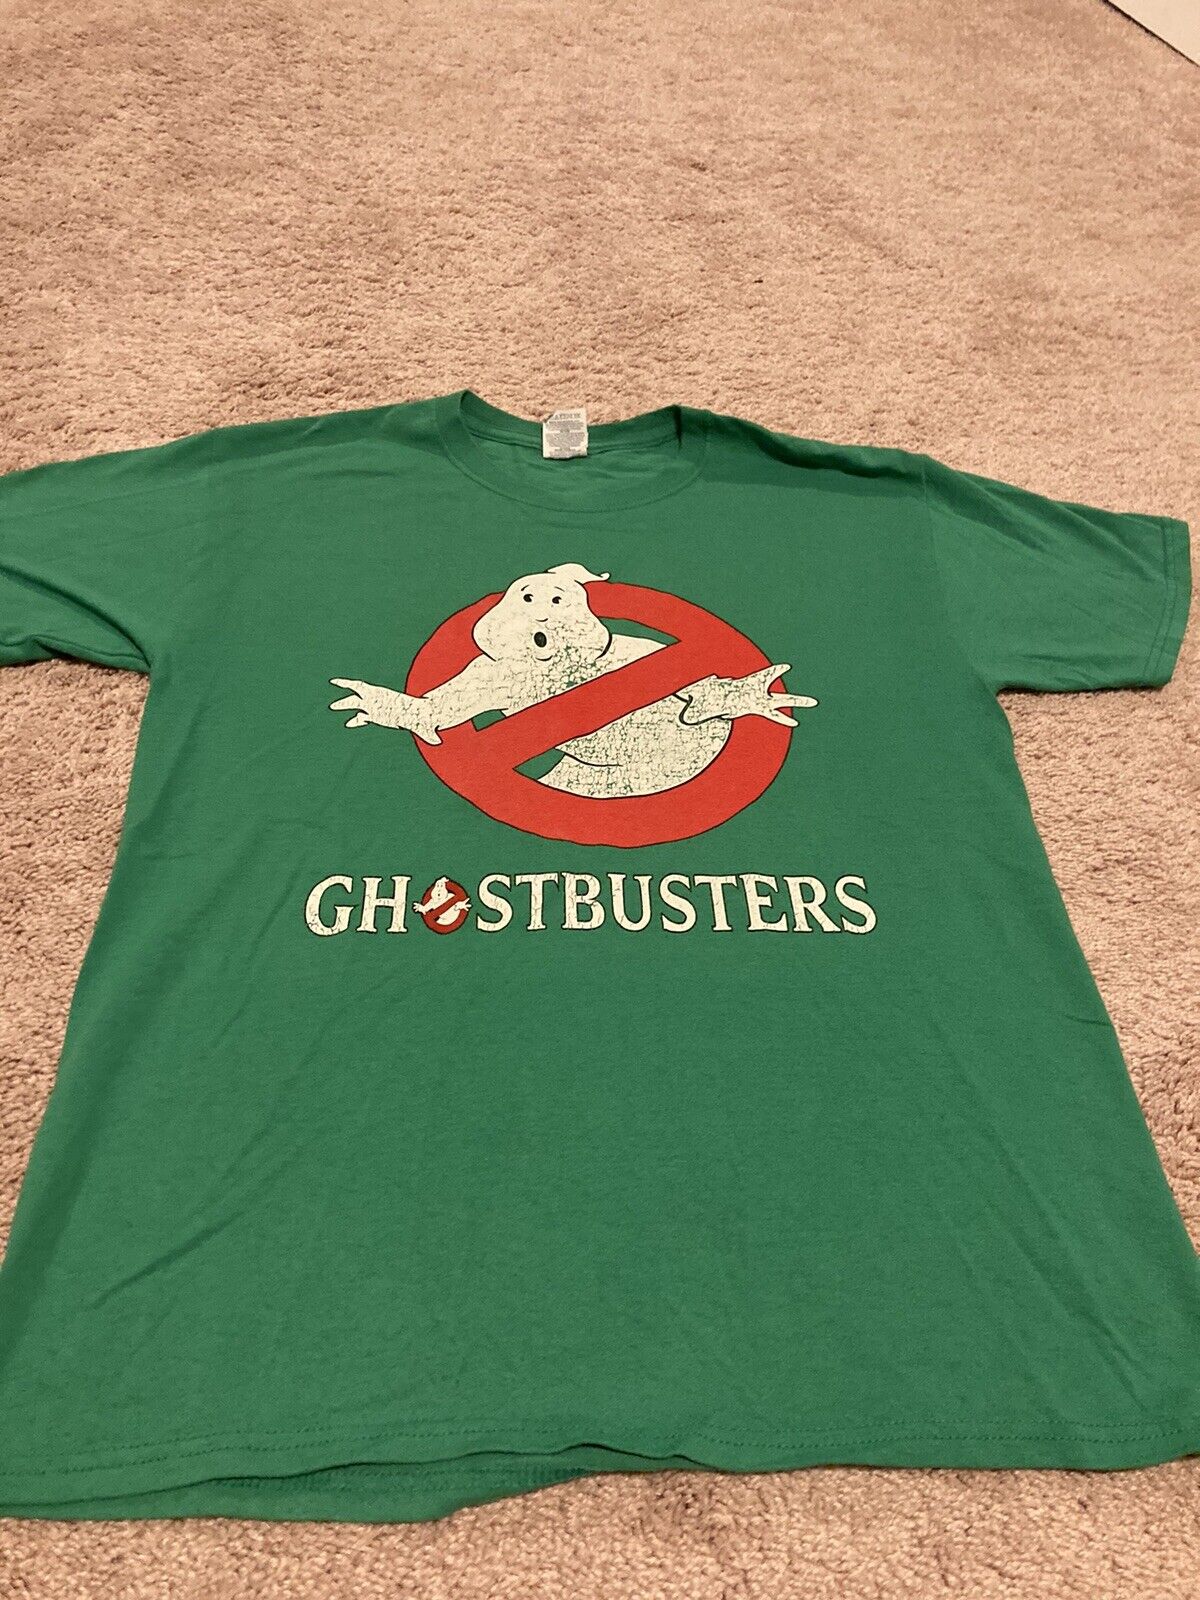 Rare Vintage 80s Official Ghostbusters 1984 Bill Murray Film Promo T Shirt Sz M